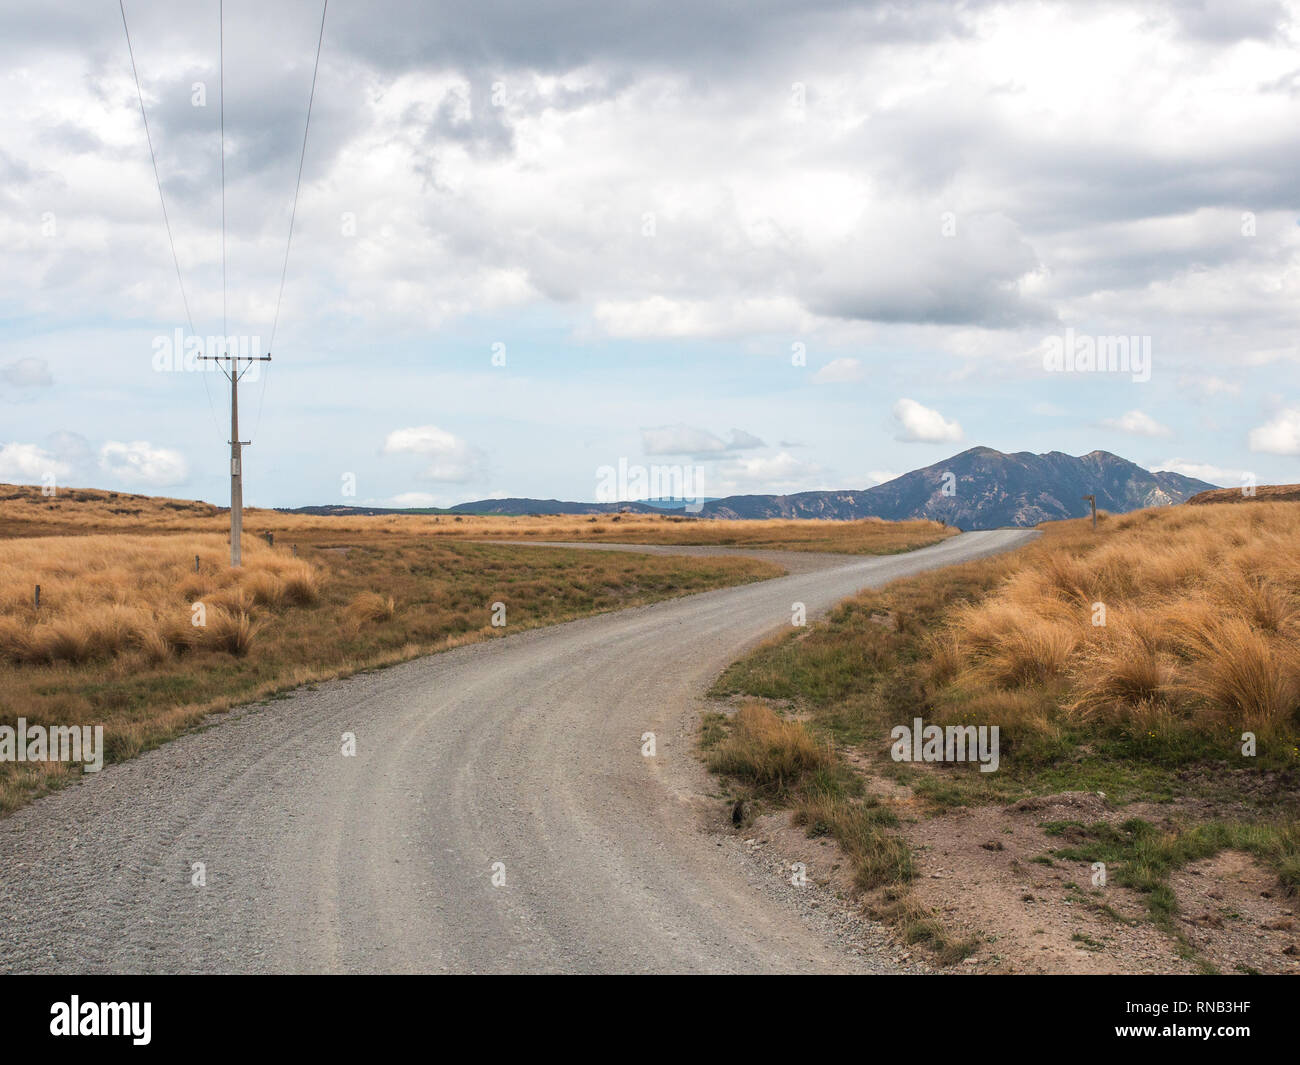 Power pole line on a bend of an unsealed gravel road, tussock country, Ngamatea Station, Inland Mokai Patea, Central North Island, New Zealand Stock Photo